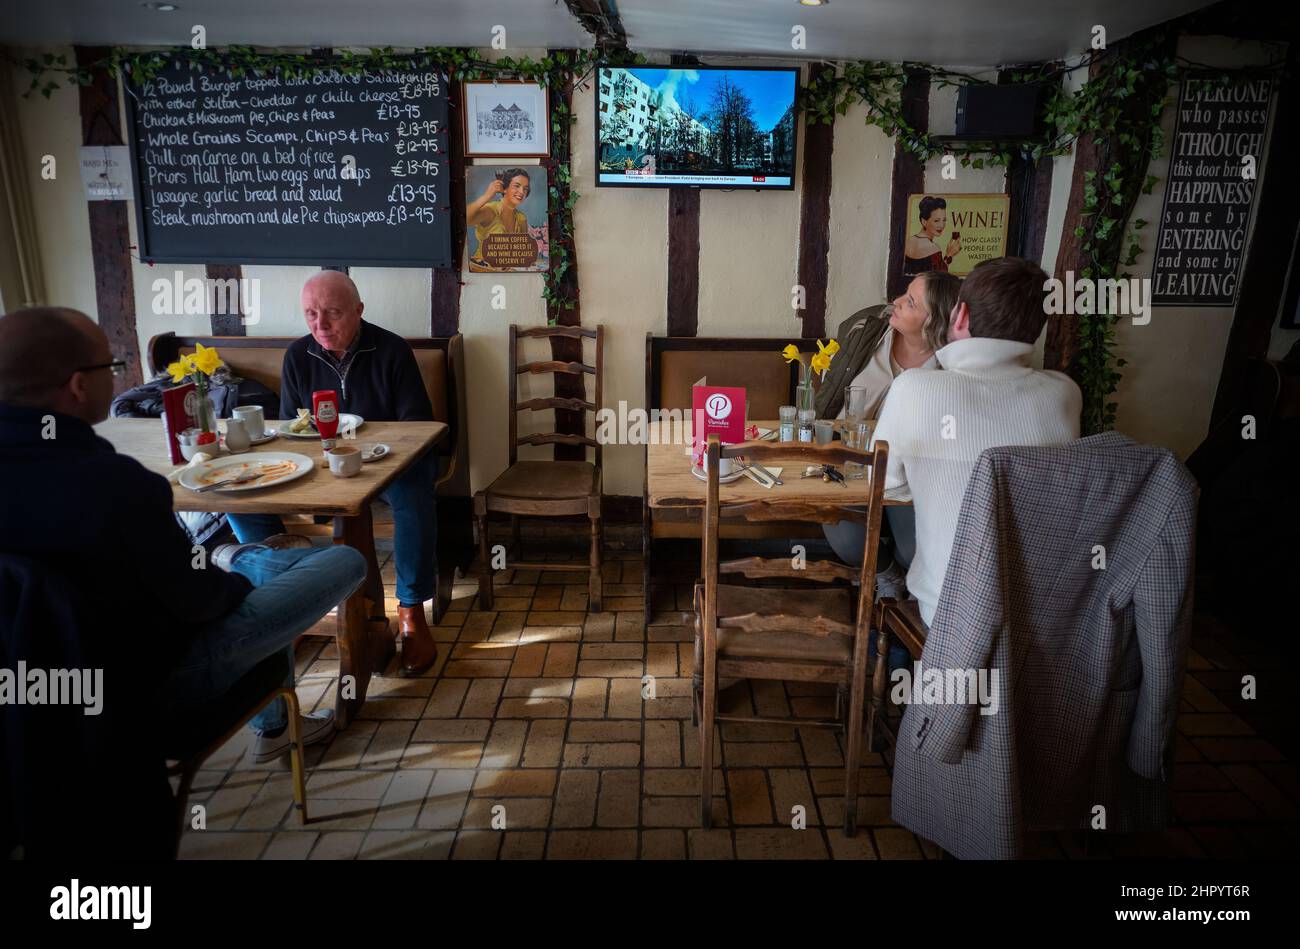 Russia Invades Ukraine seen on TV in wine bar Thaxted Essex, UK. 24th Feb, 2022. As customers of Parrisges Wine Bar in Thaxted Essex UK eat their lunch the television set shows reports on the BBC showing the invasion of Ukraine by Russia today. Credit: BRIAN HARRIS/Alamy Live News Stock Photo